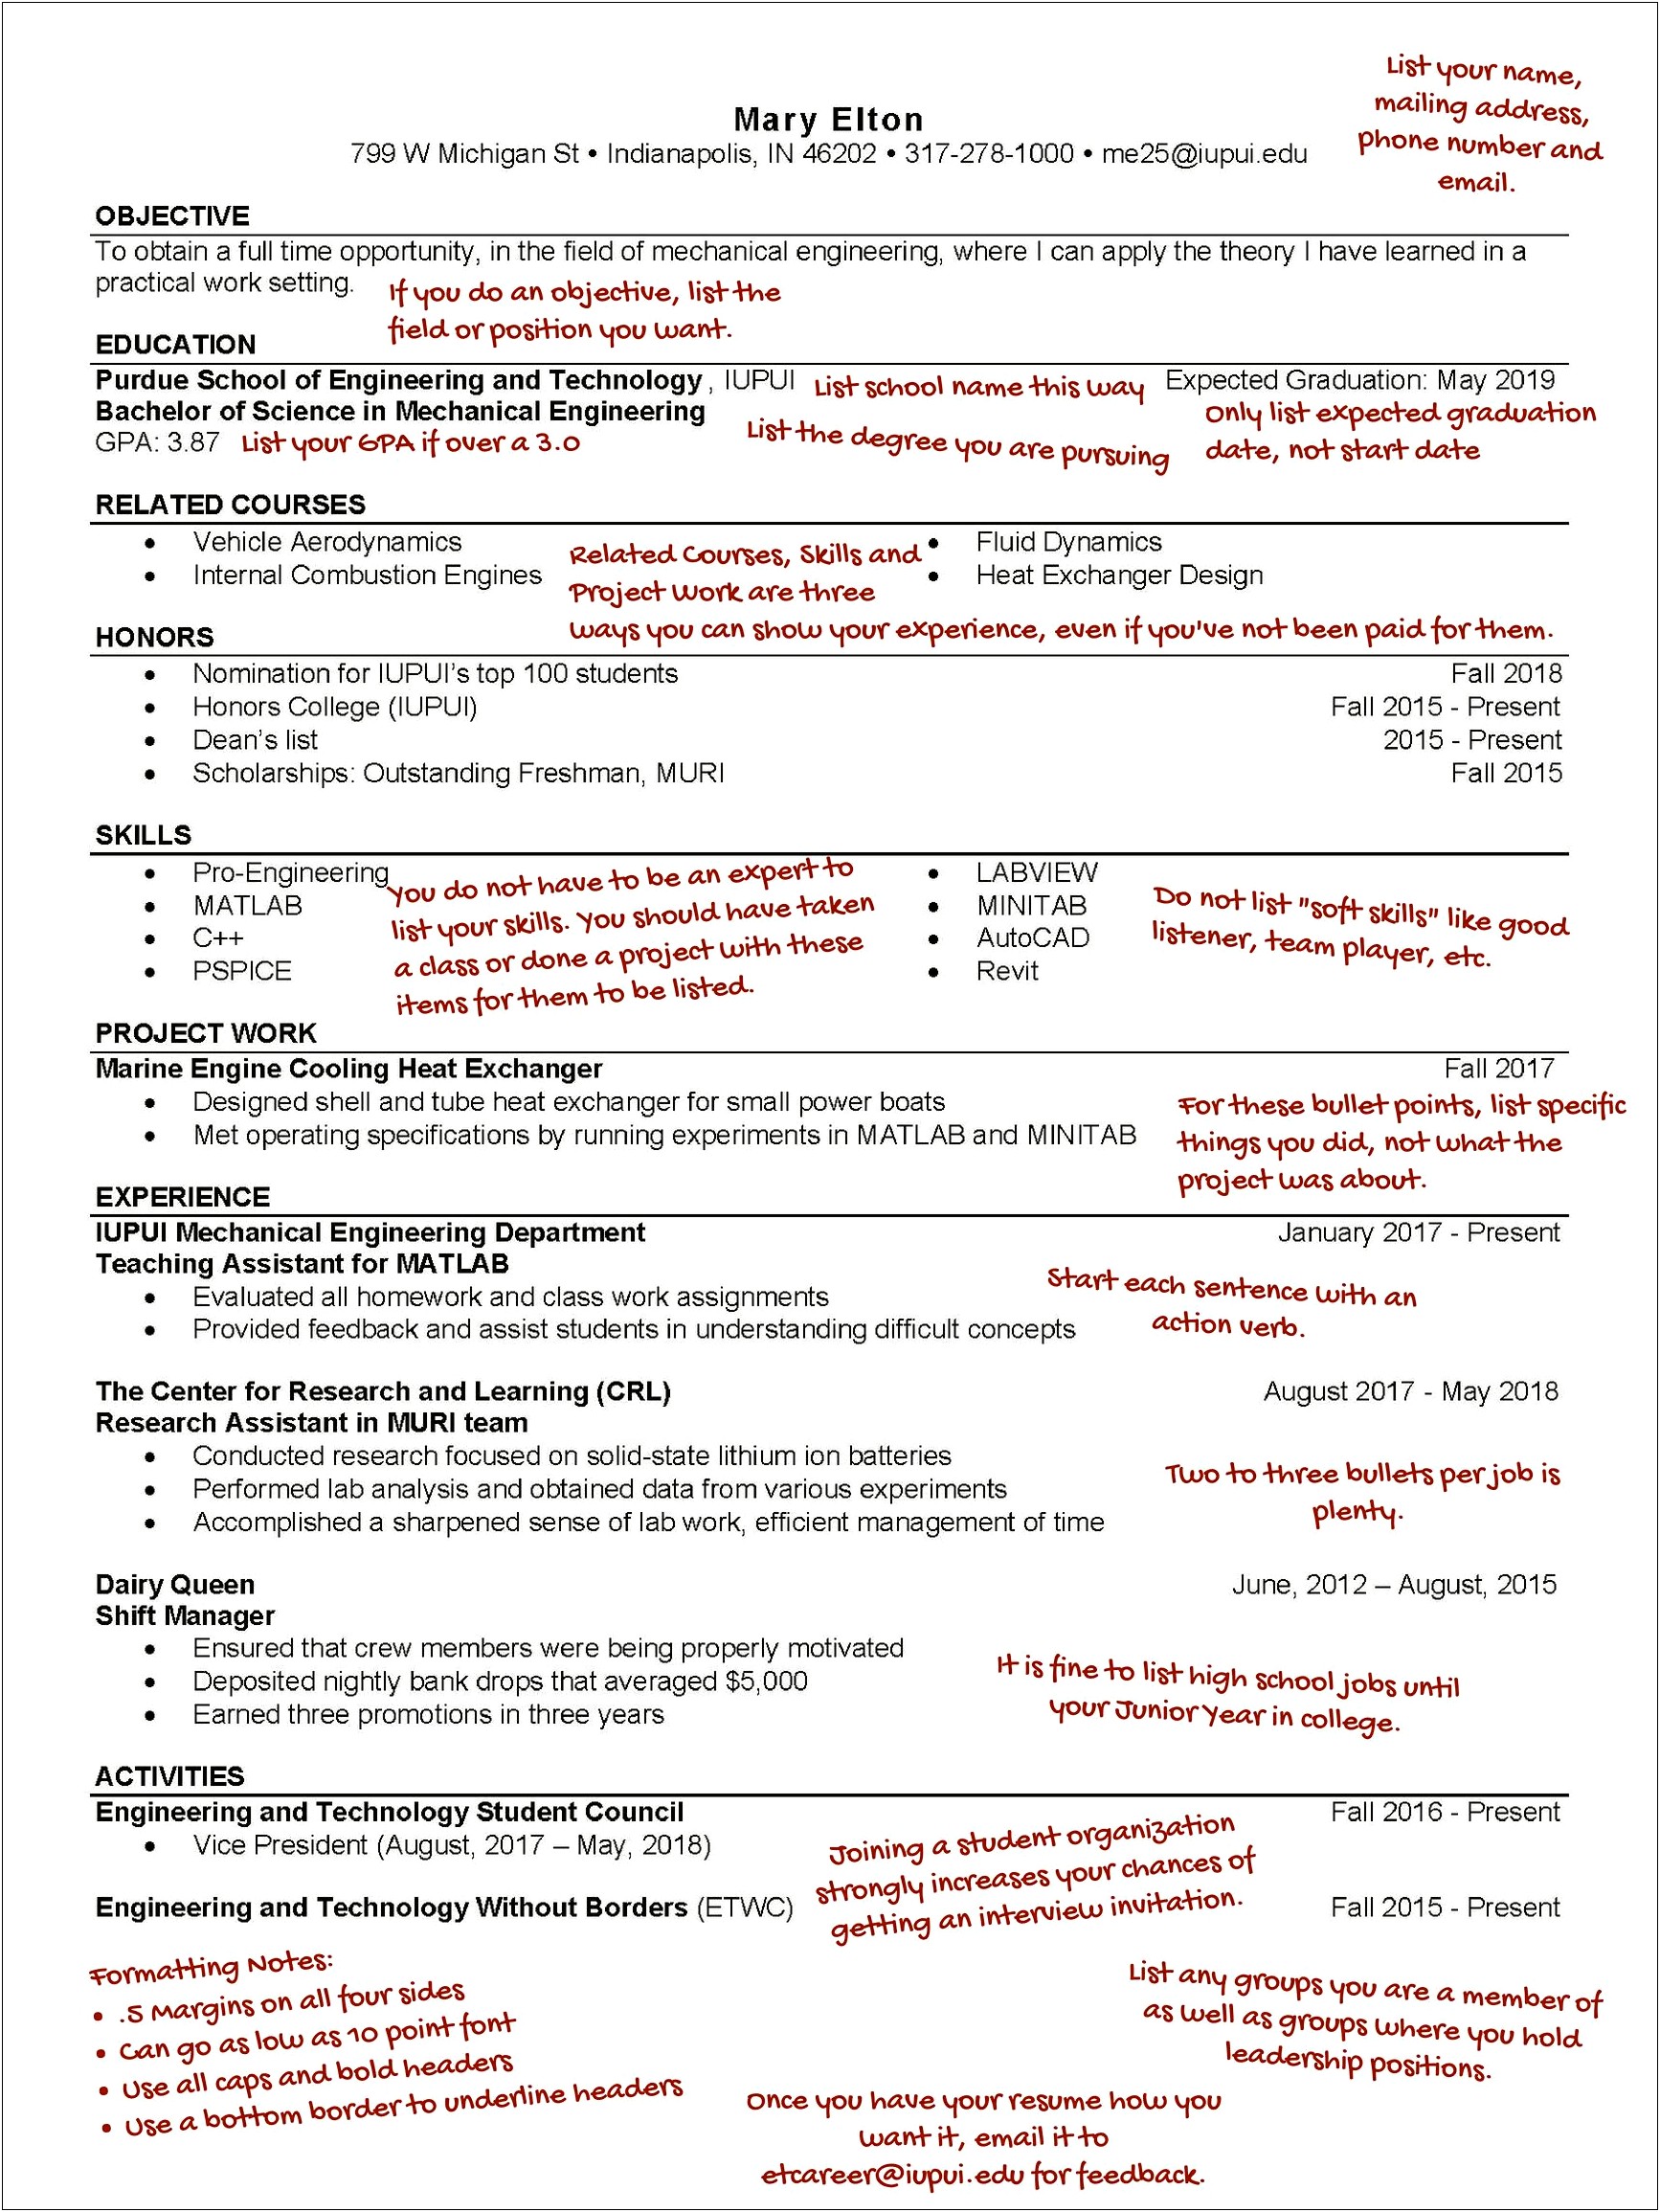 Resumes That Get Jobs 2017